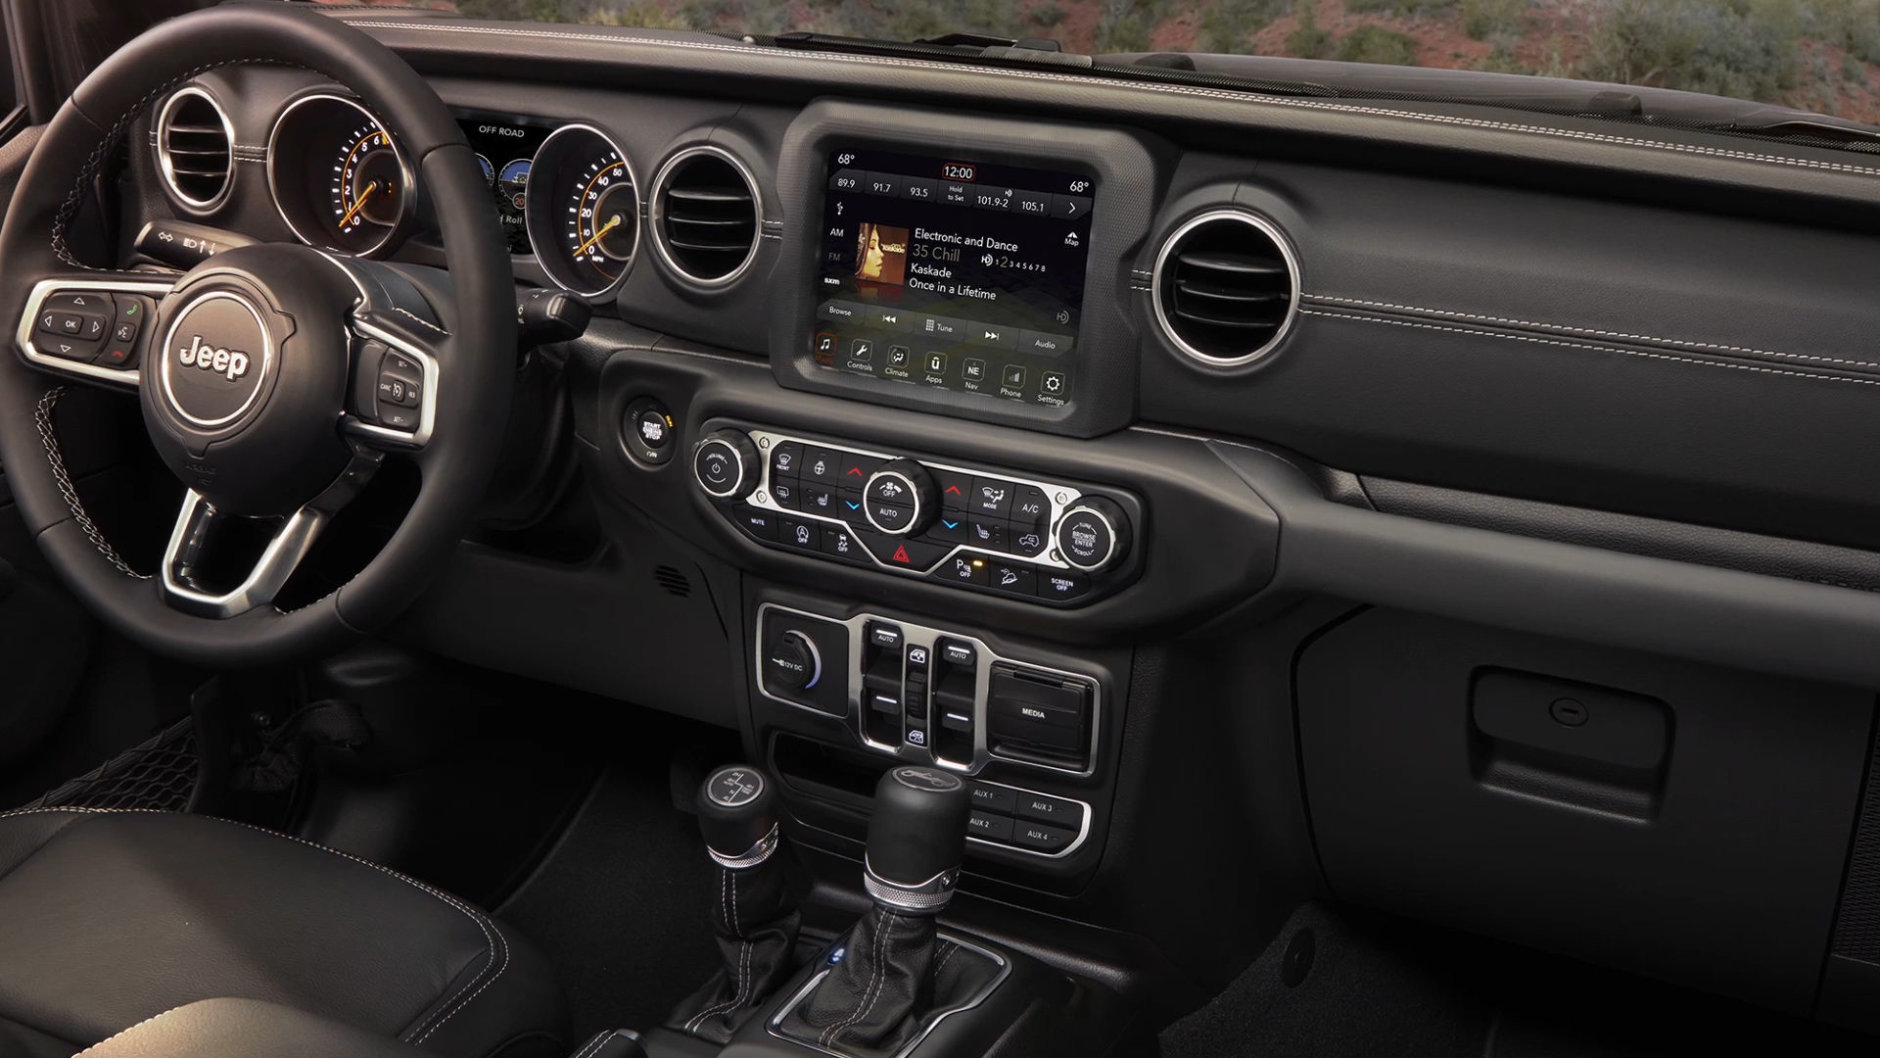 One huge improvement is inside the Jeep, says Mike Parris. (Courtesy: Fiat Chrysler Automobiles)